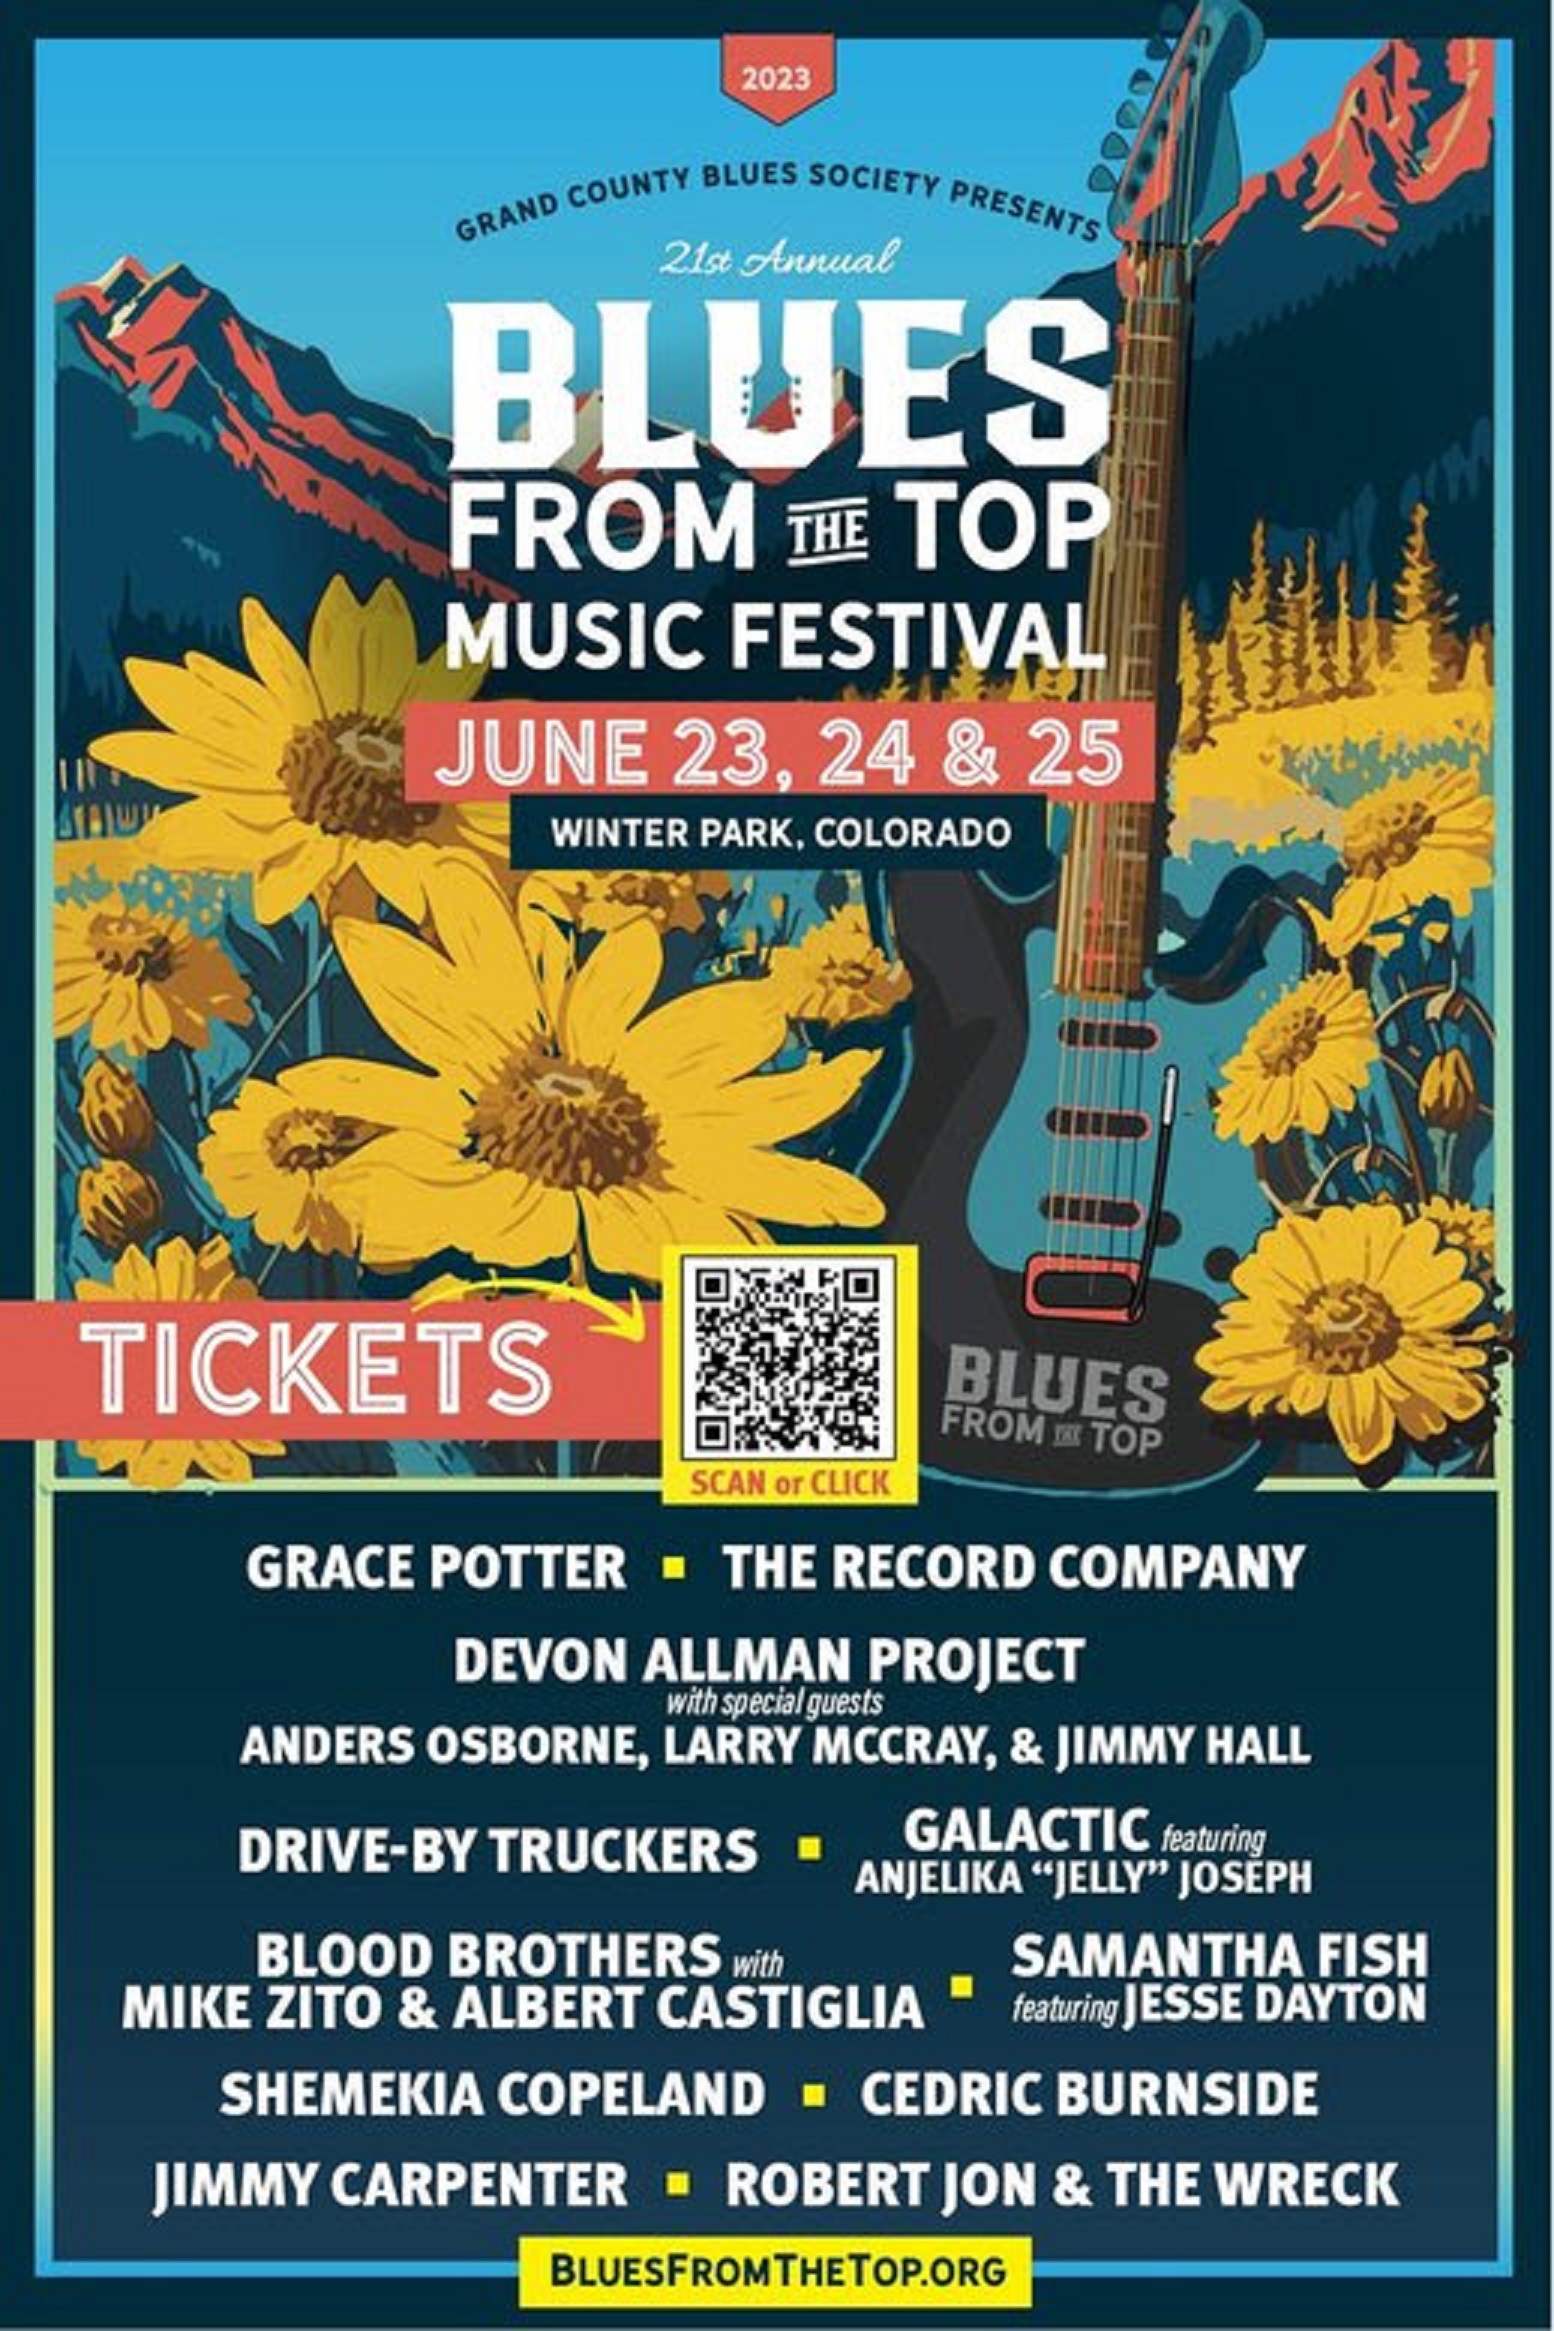  21th Anniversary of Blues From The Top Music Festival - June 23-25, 2023